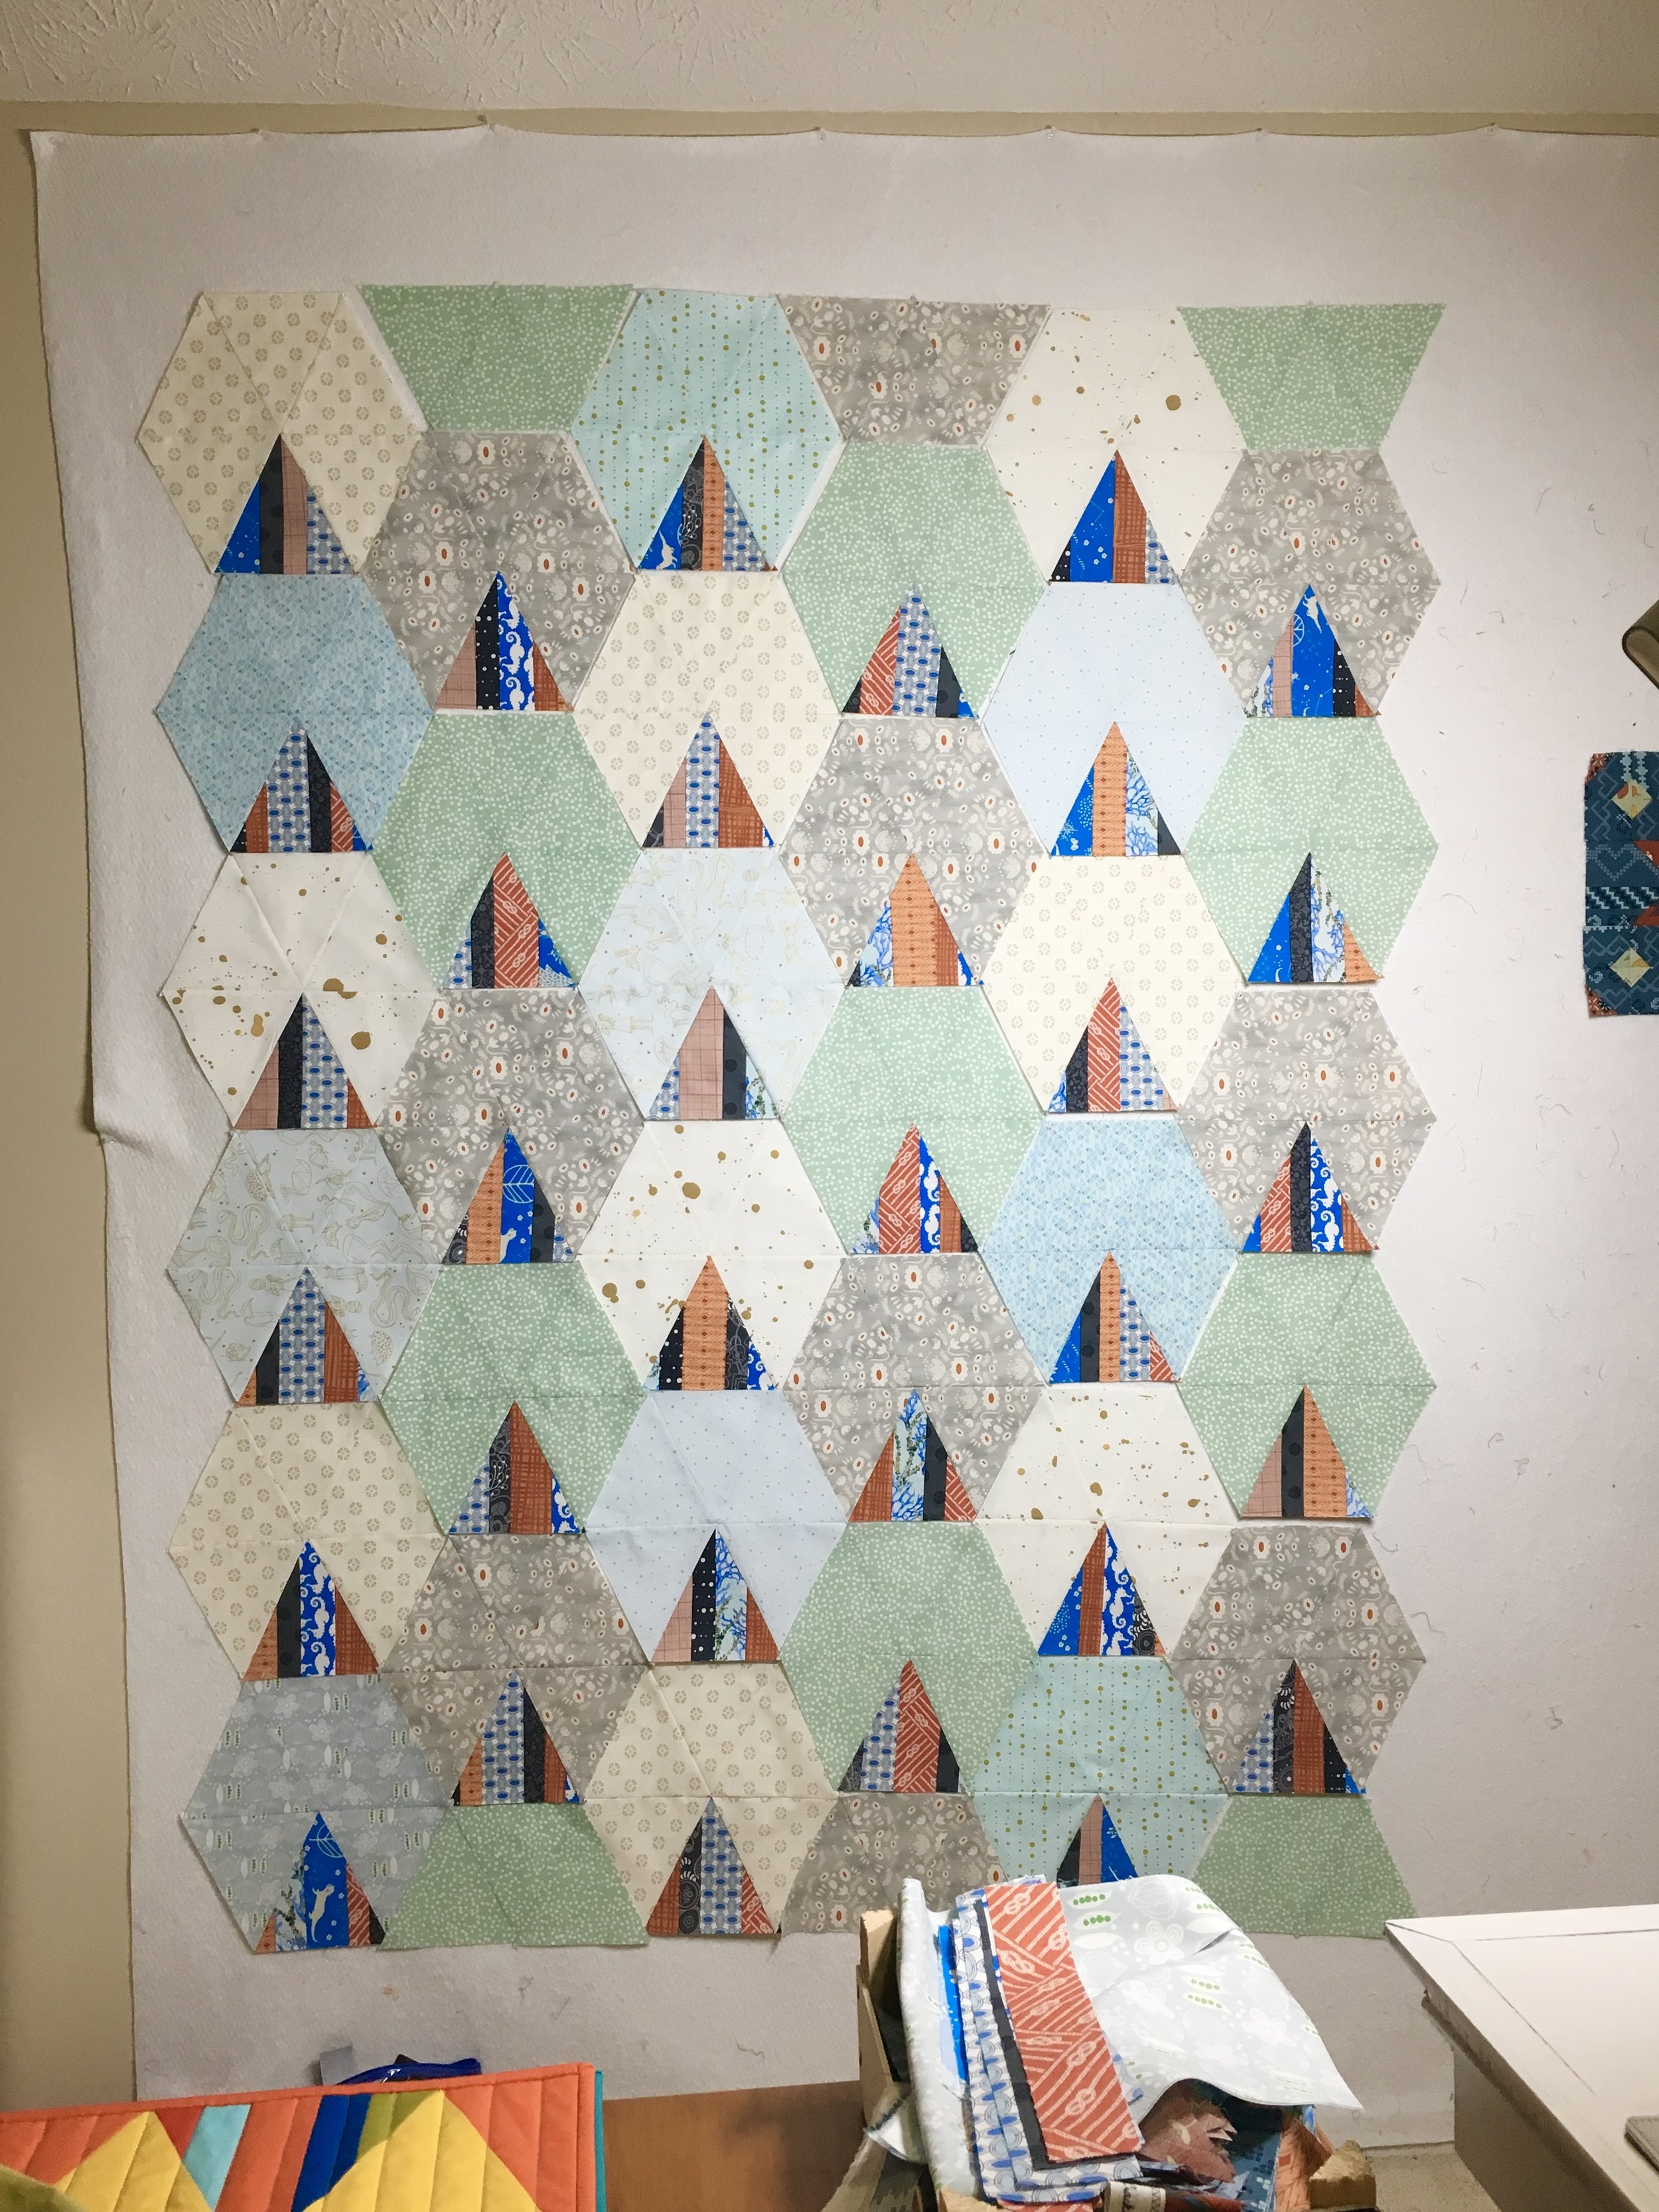 How to Make a Design Wall — String & Story